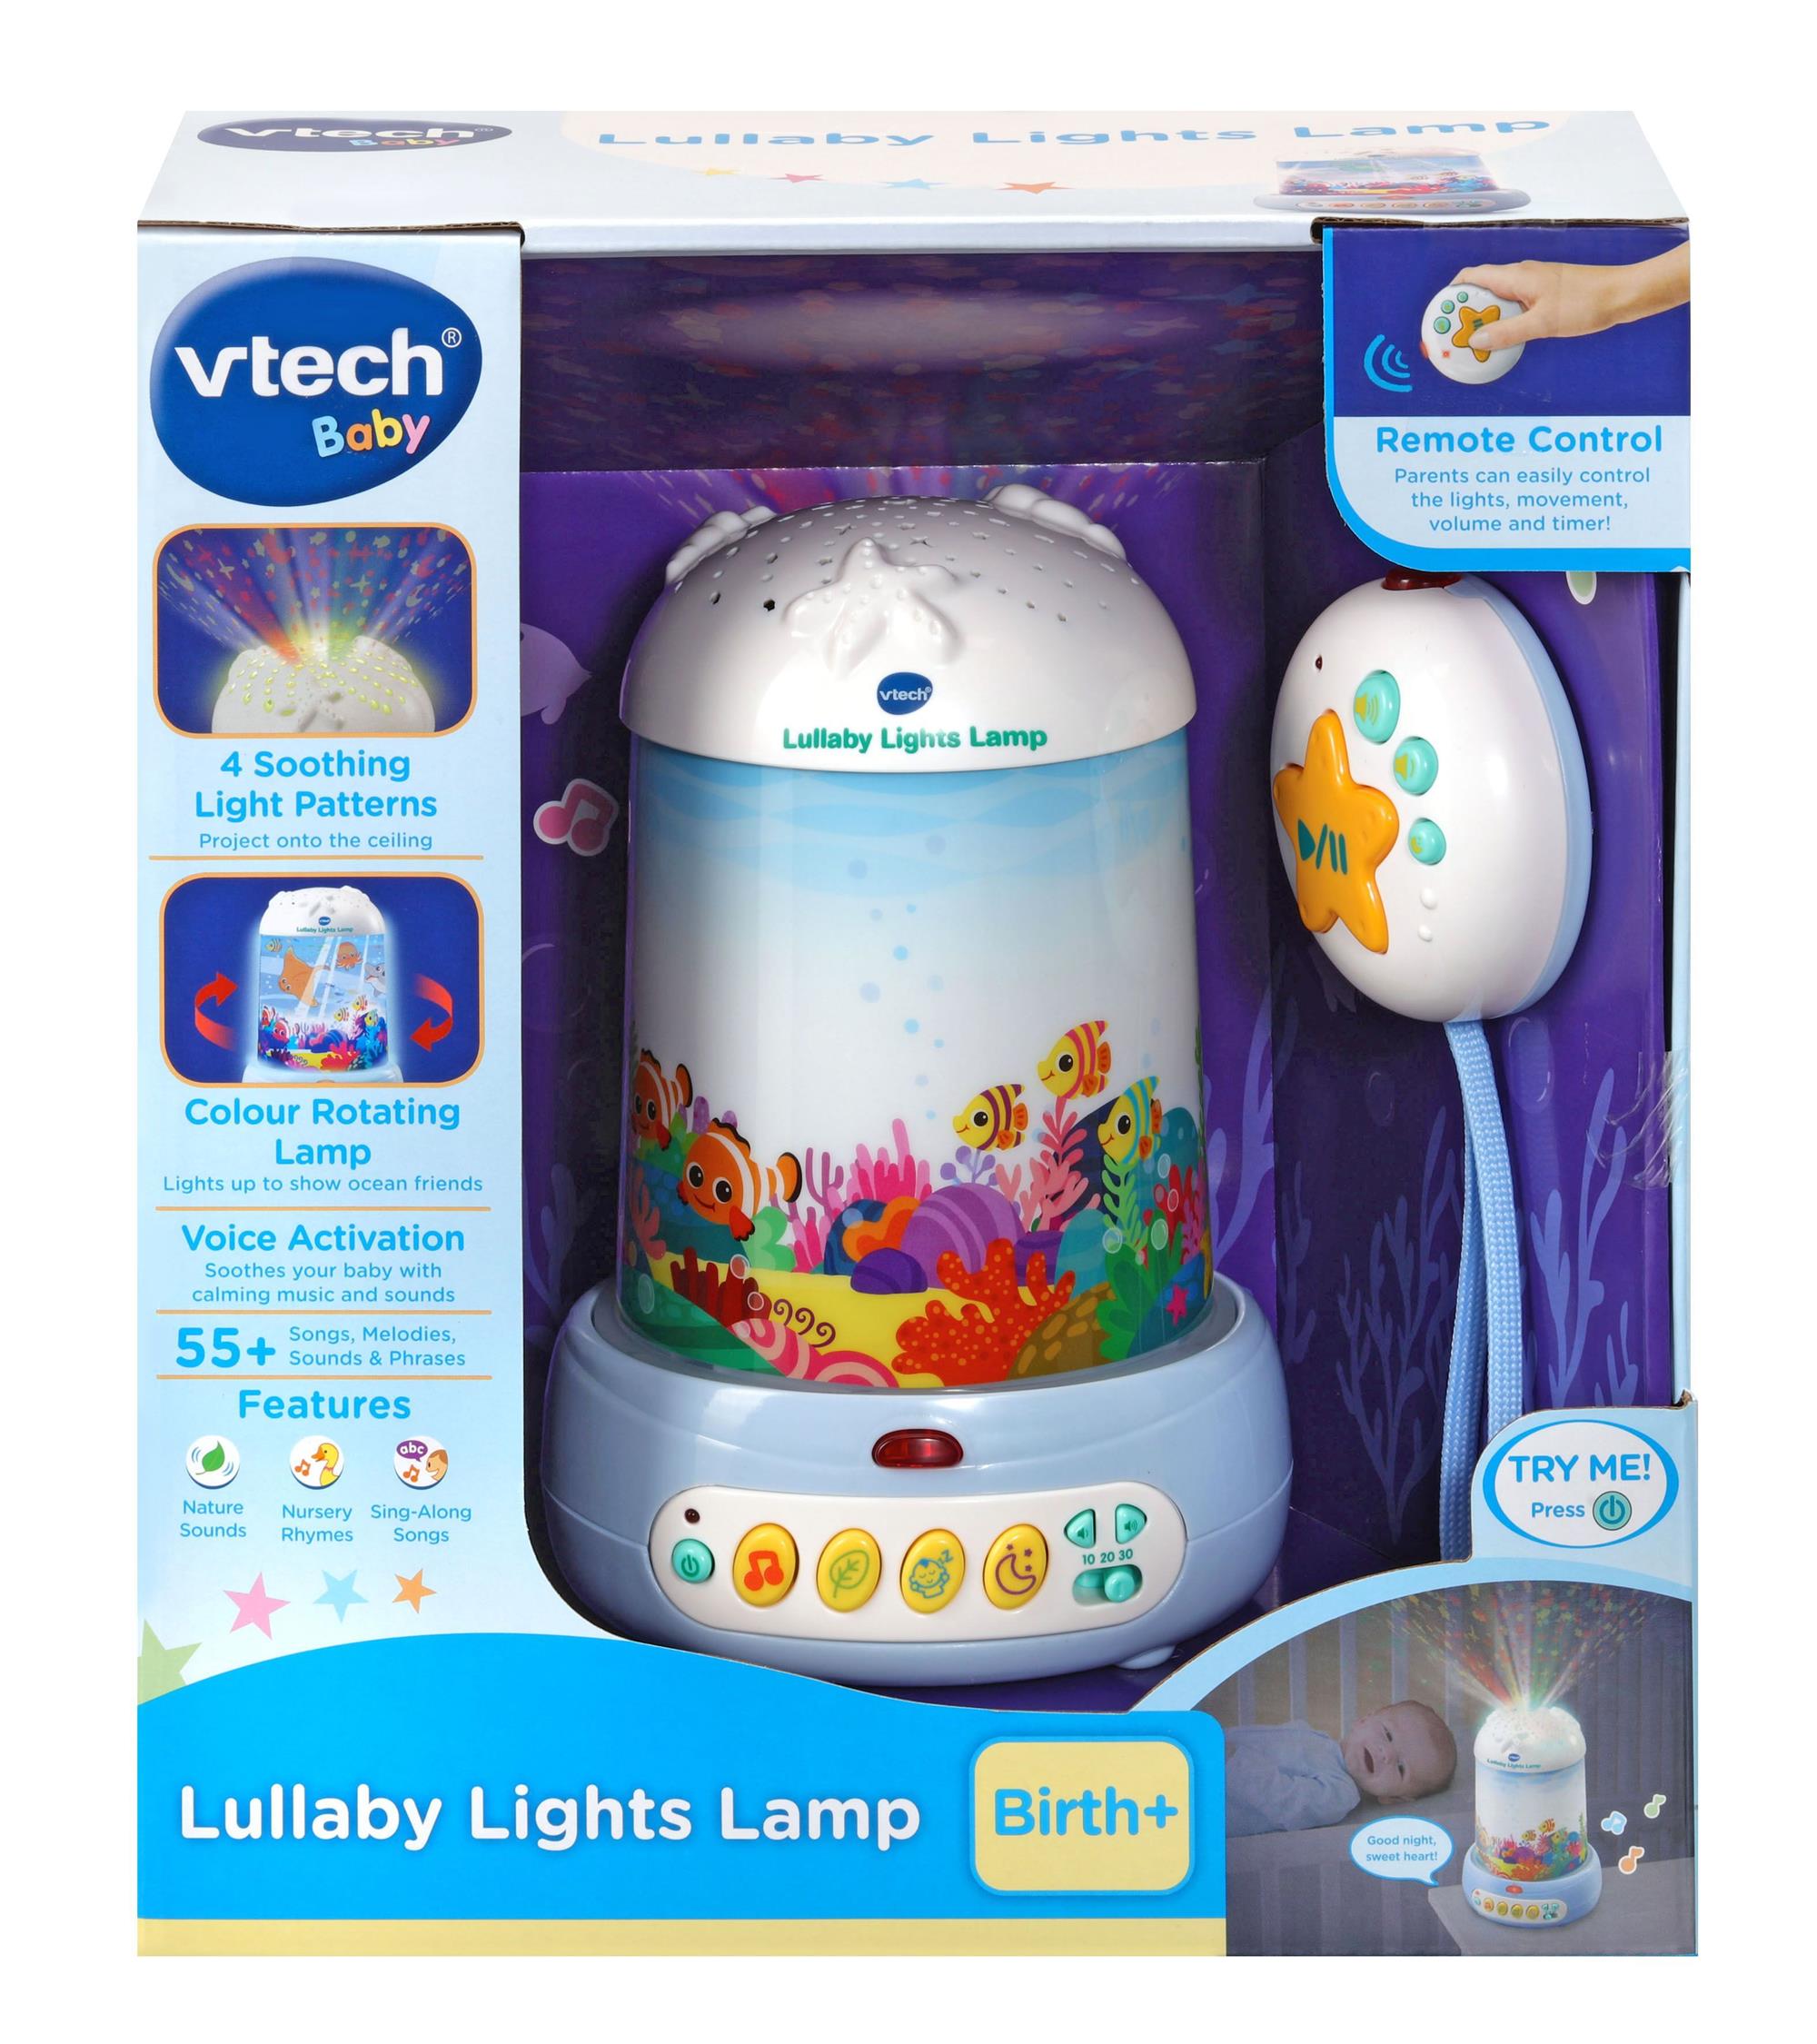 New product - Magic 3D Lights from vtech 